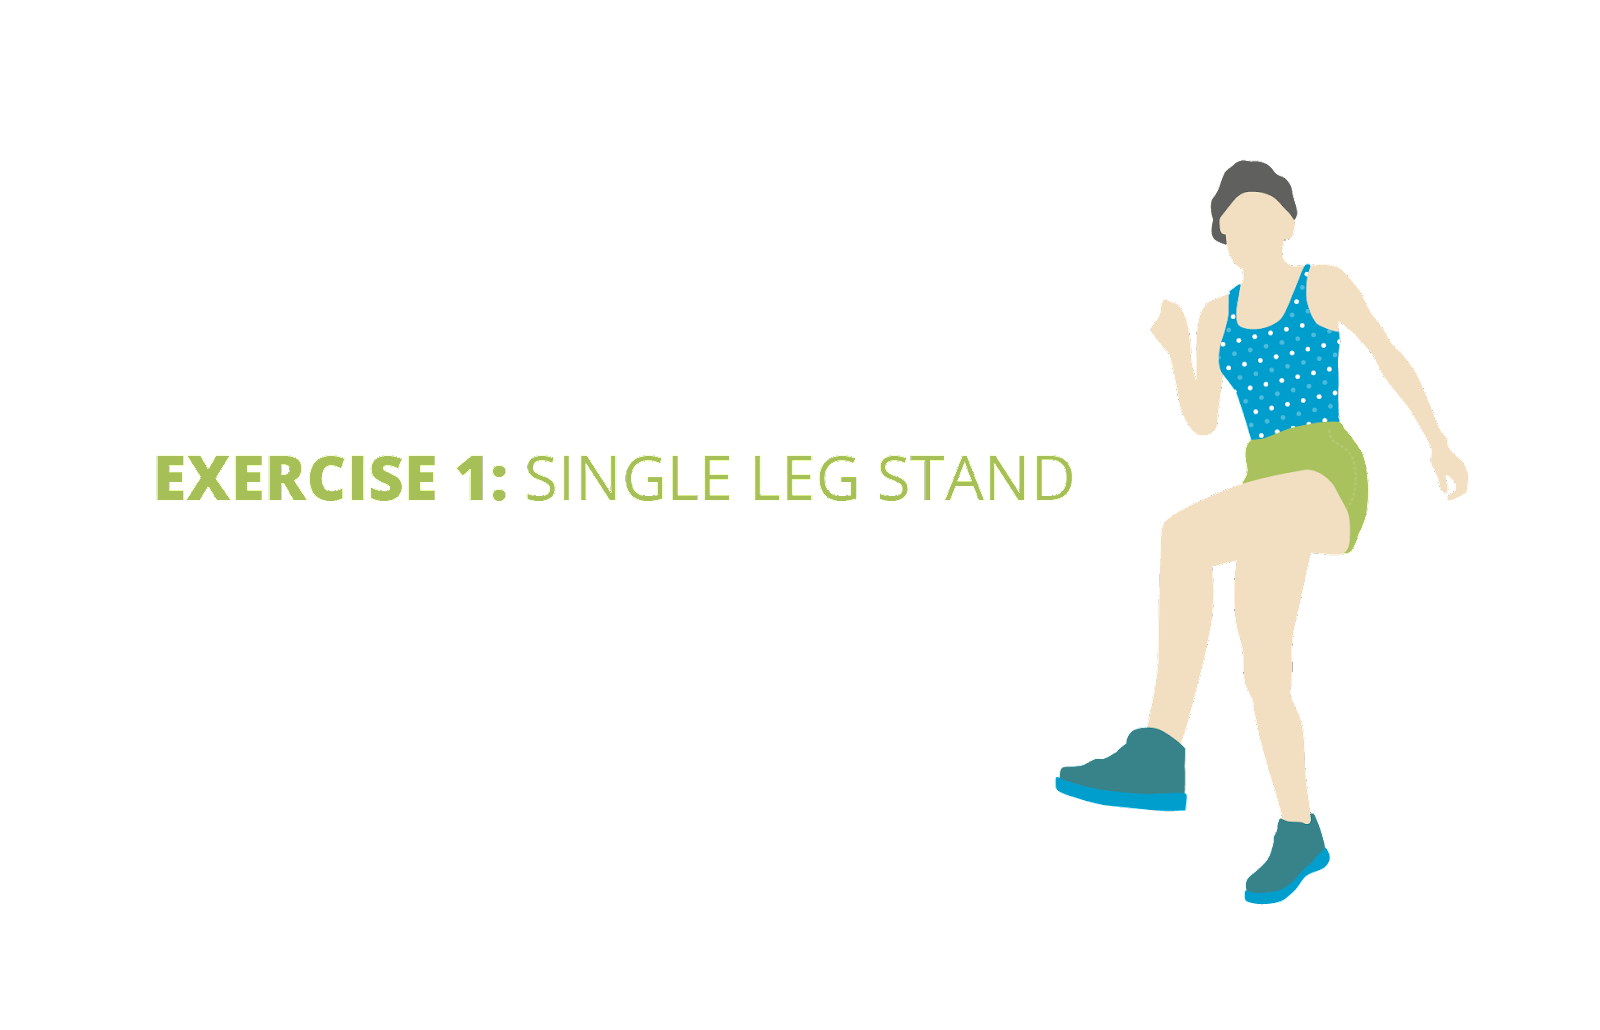 Exercise one - single stand leg